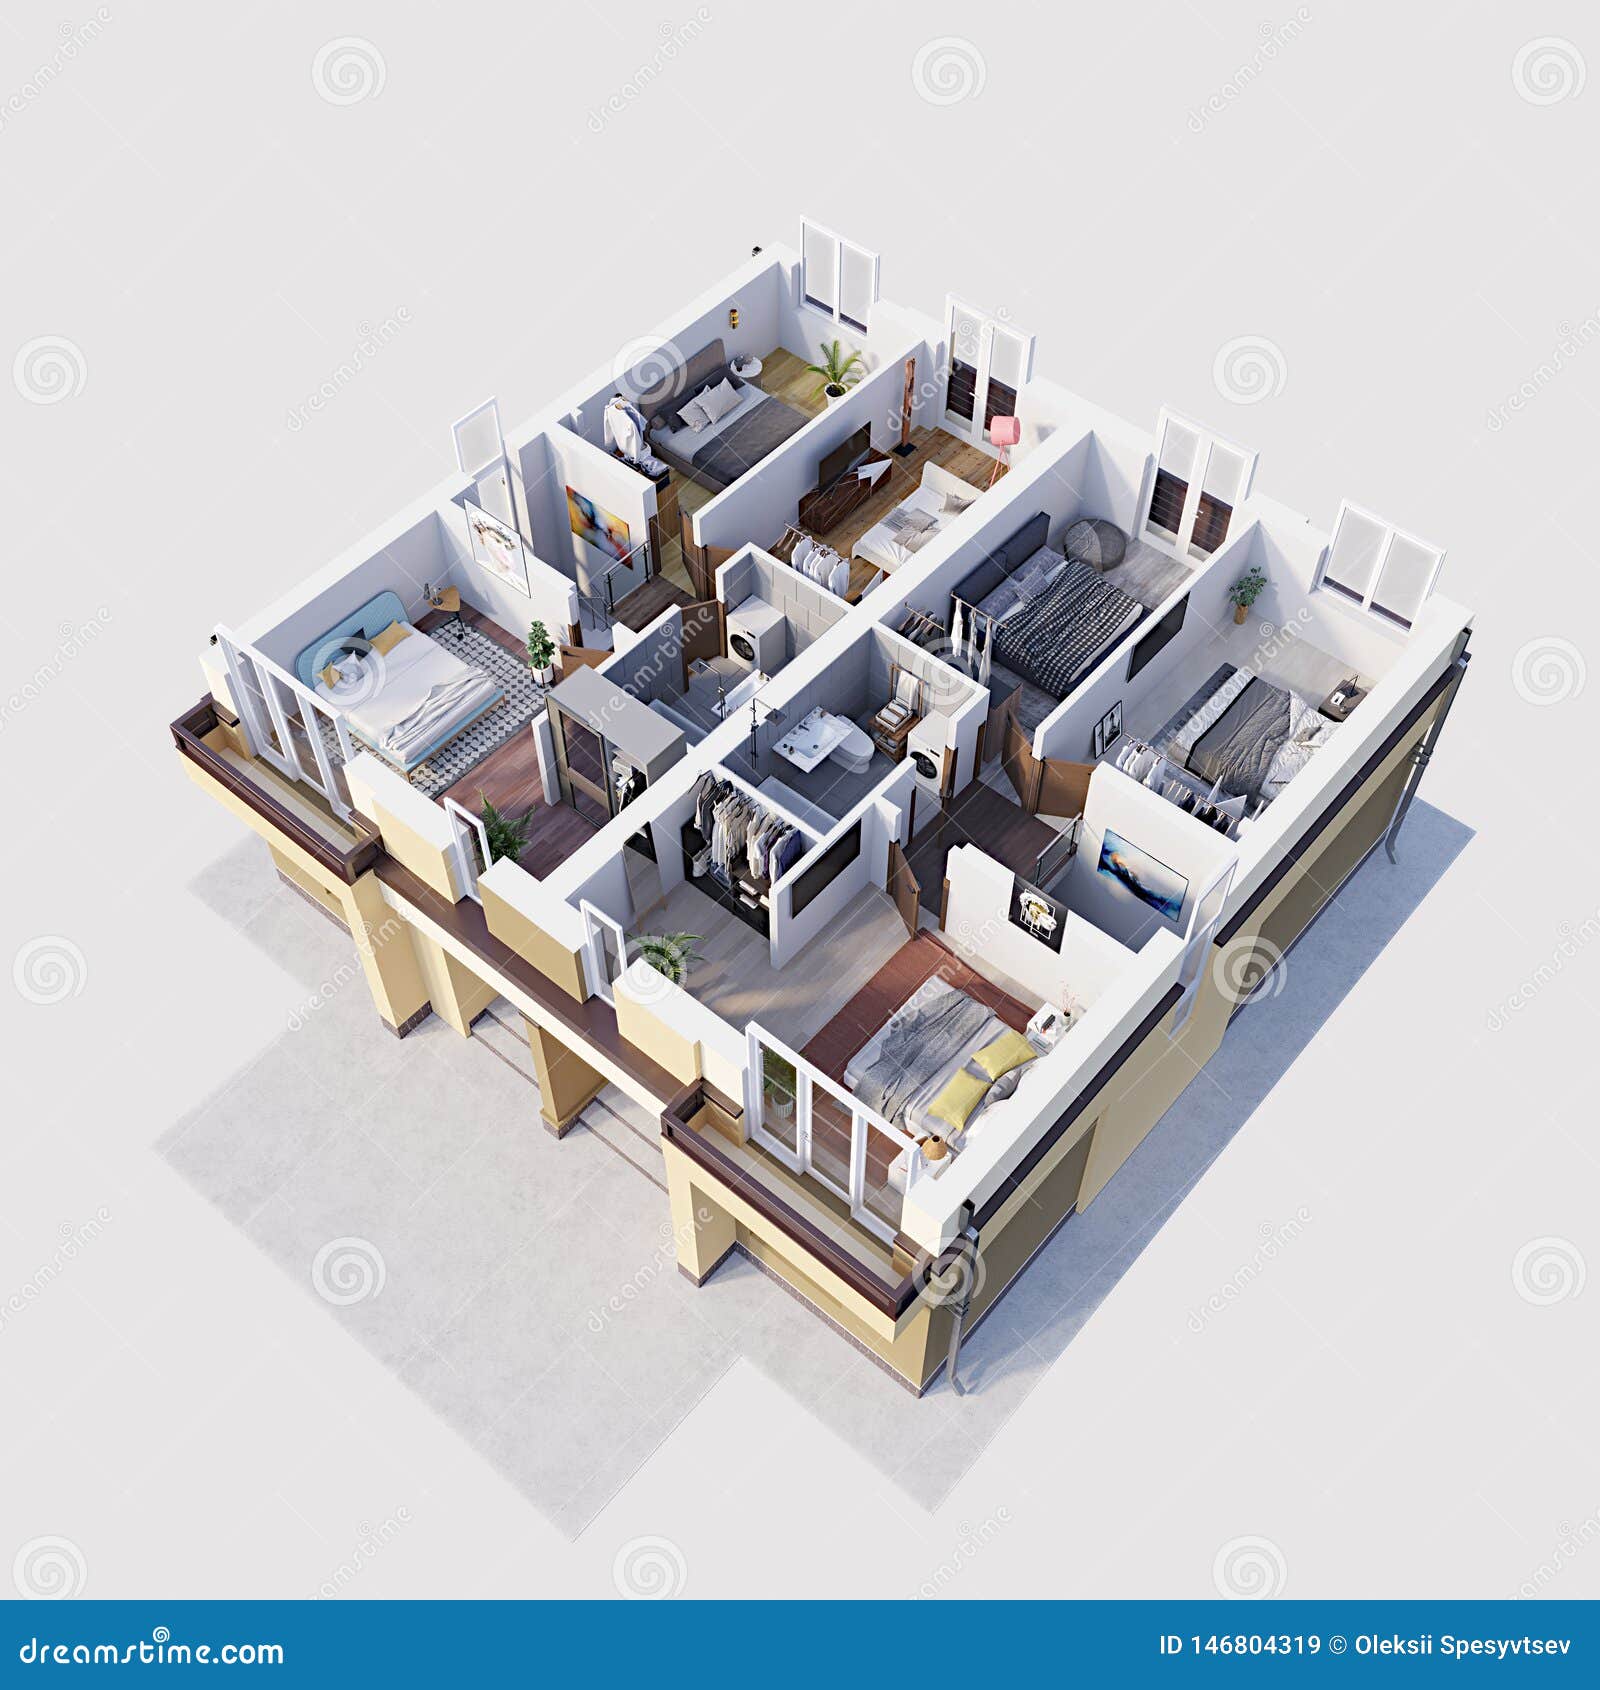 3d Render Residential Floor Plan And Layout Of Modern Apartments